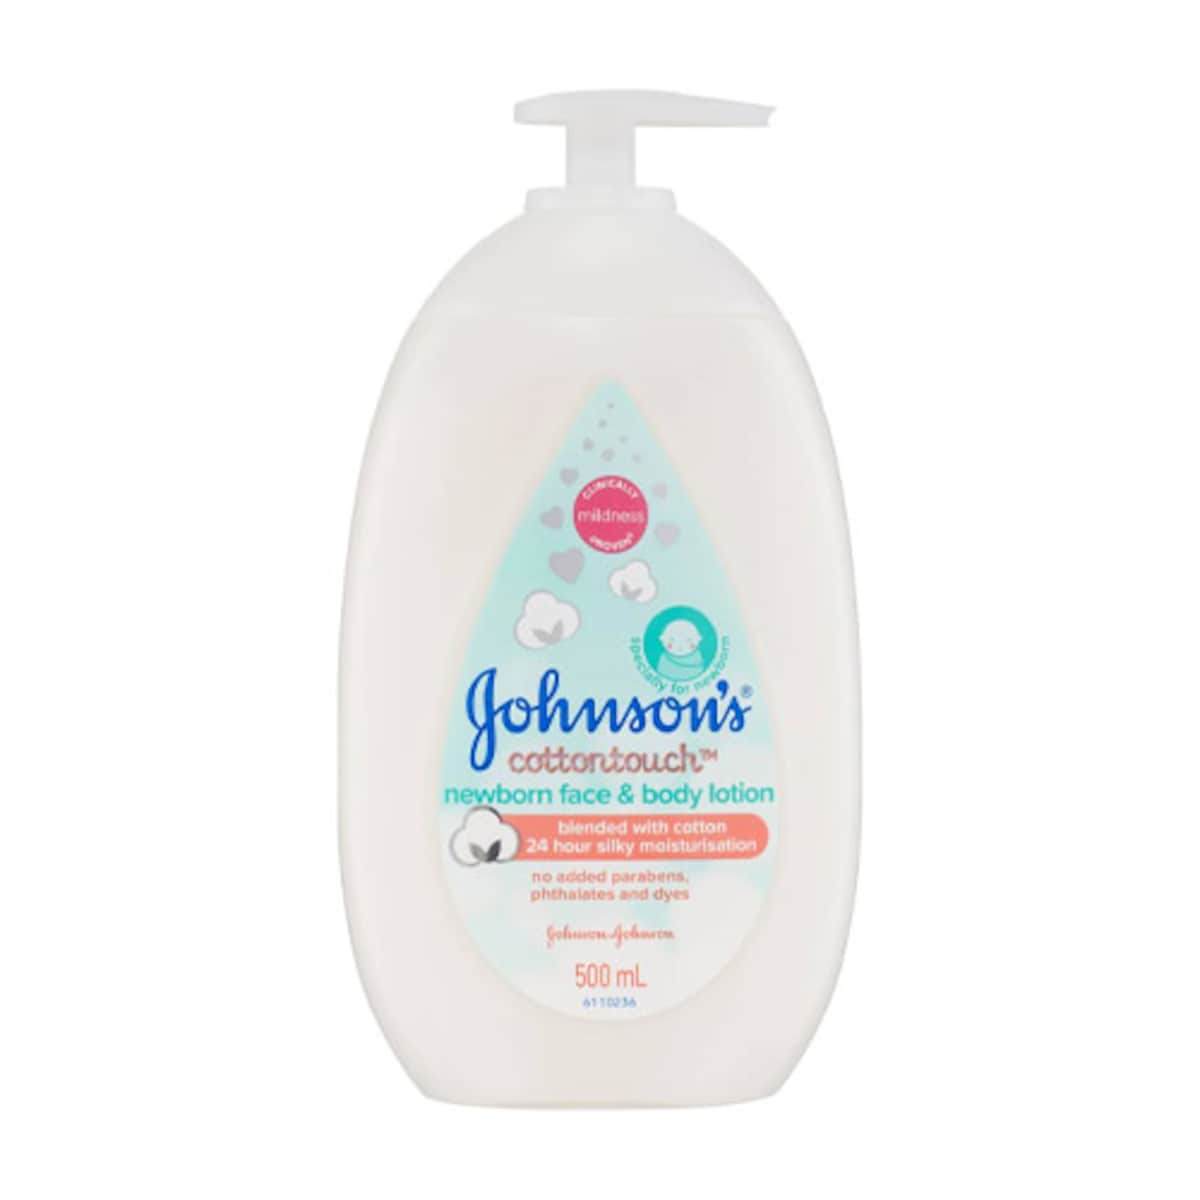 Johnsons Cottontouch Newborn Baby Face & Body Lotion 500ml